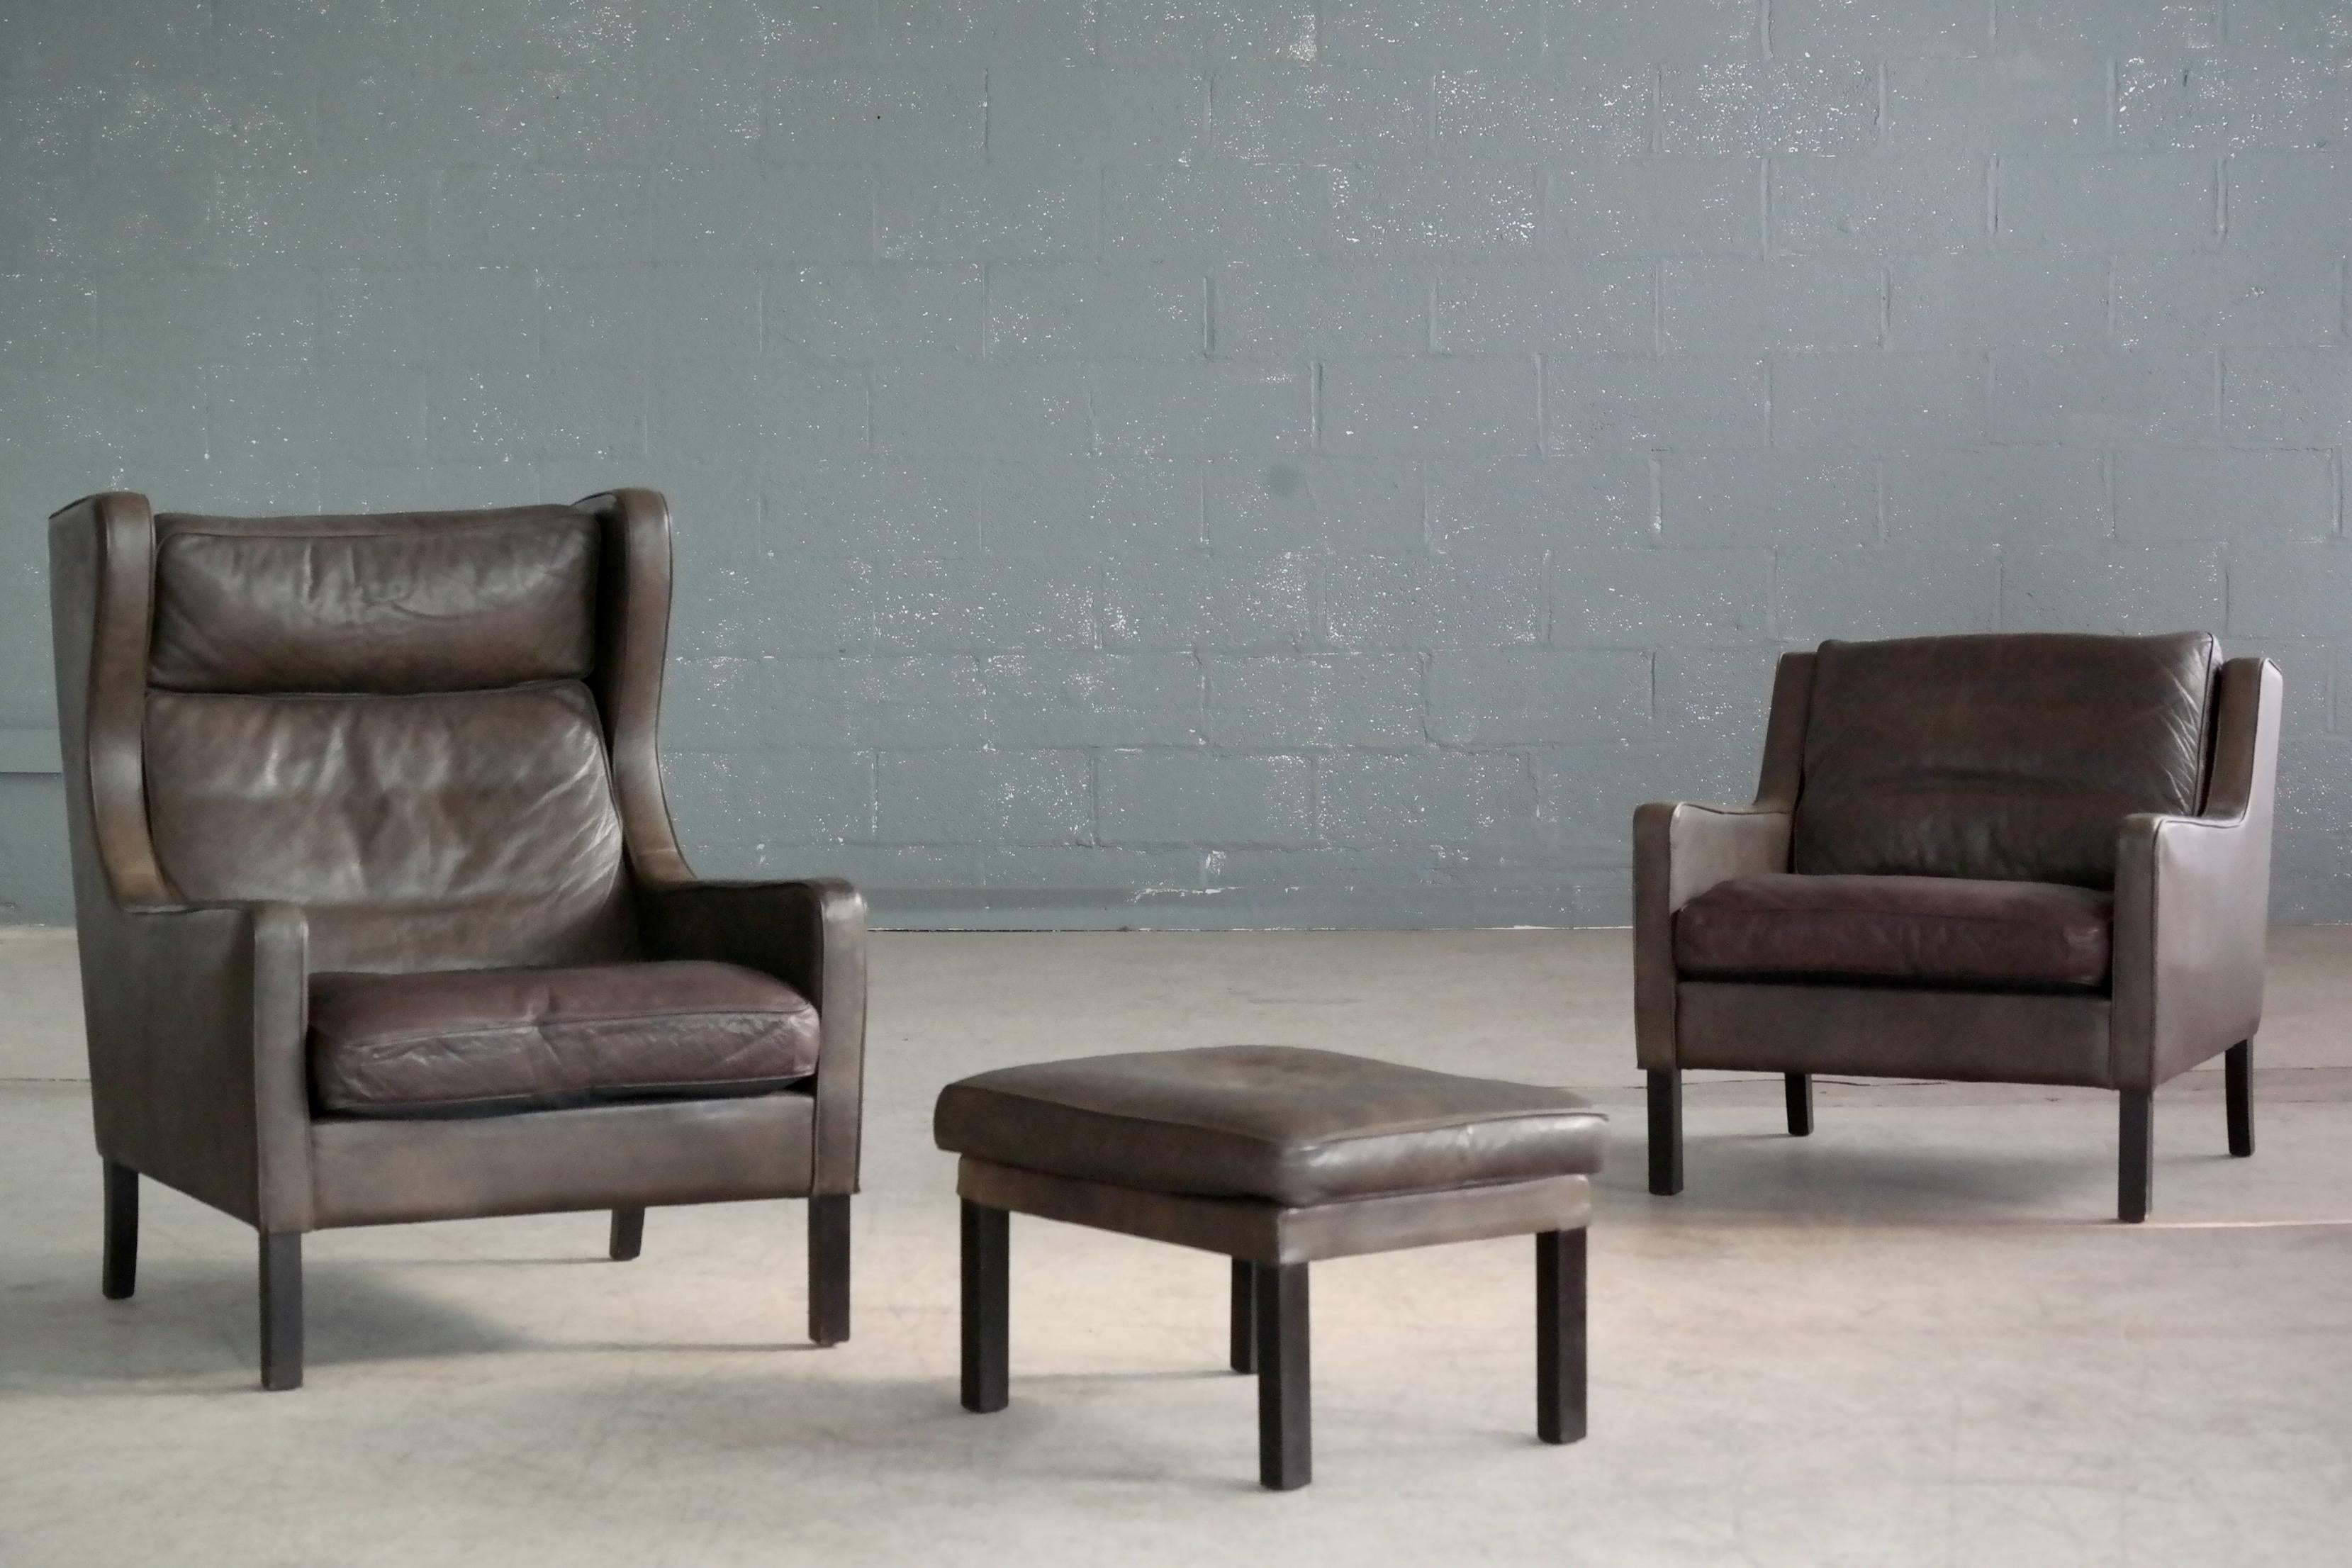 Classic Børge Mogensen style pair of high and low back lounge chairs with ottoman in dark olive colored leather designed by Georg Thams for Vejen Polstermobelfabrik, Denmark. Very nice quality leather with great patina and age wear including a